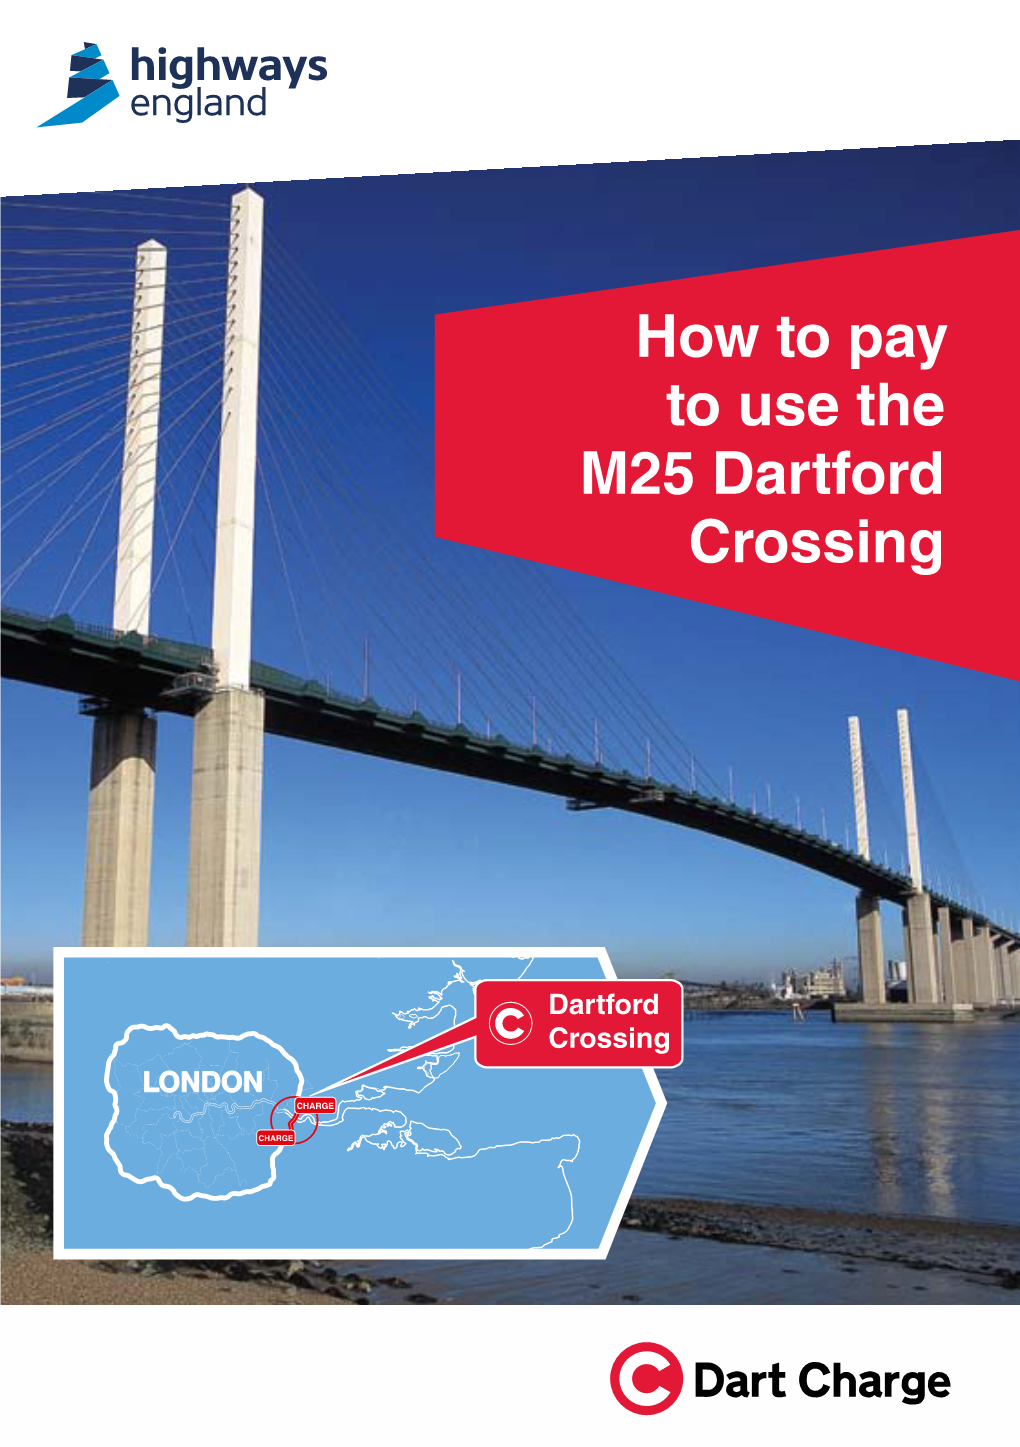 How to Pay to Use the M25 Dartford Crossing